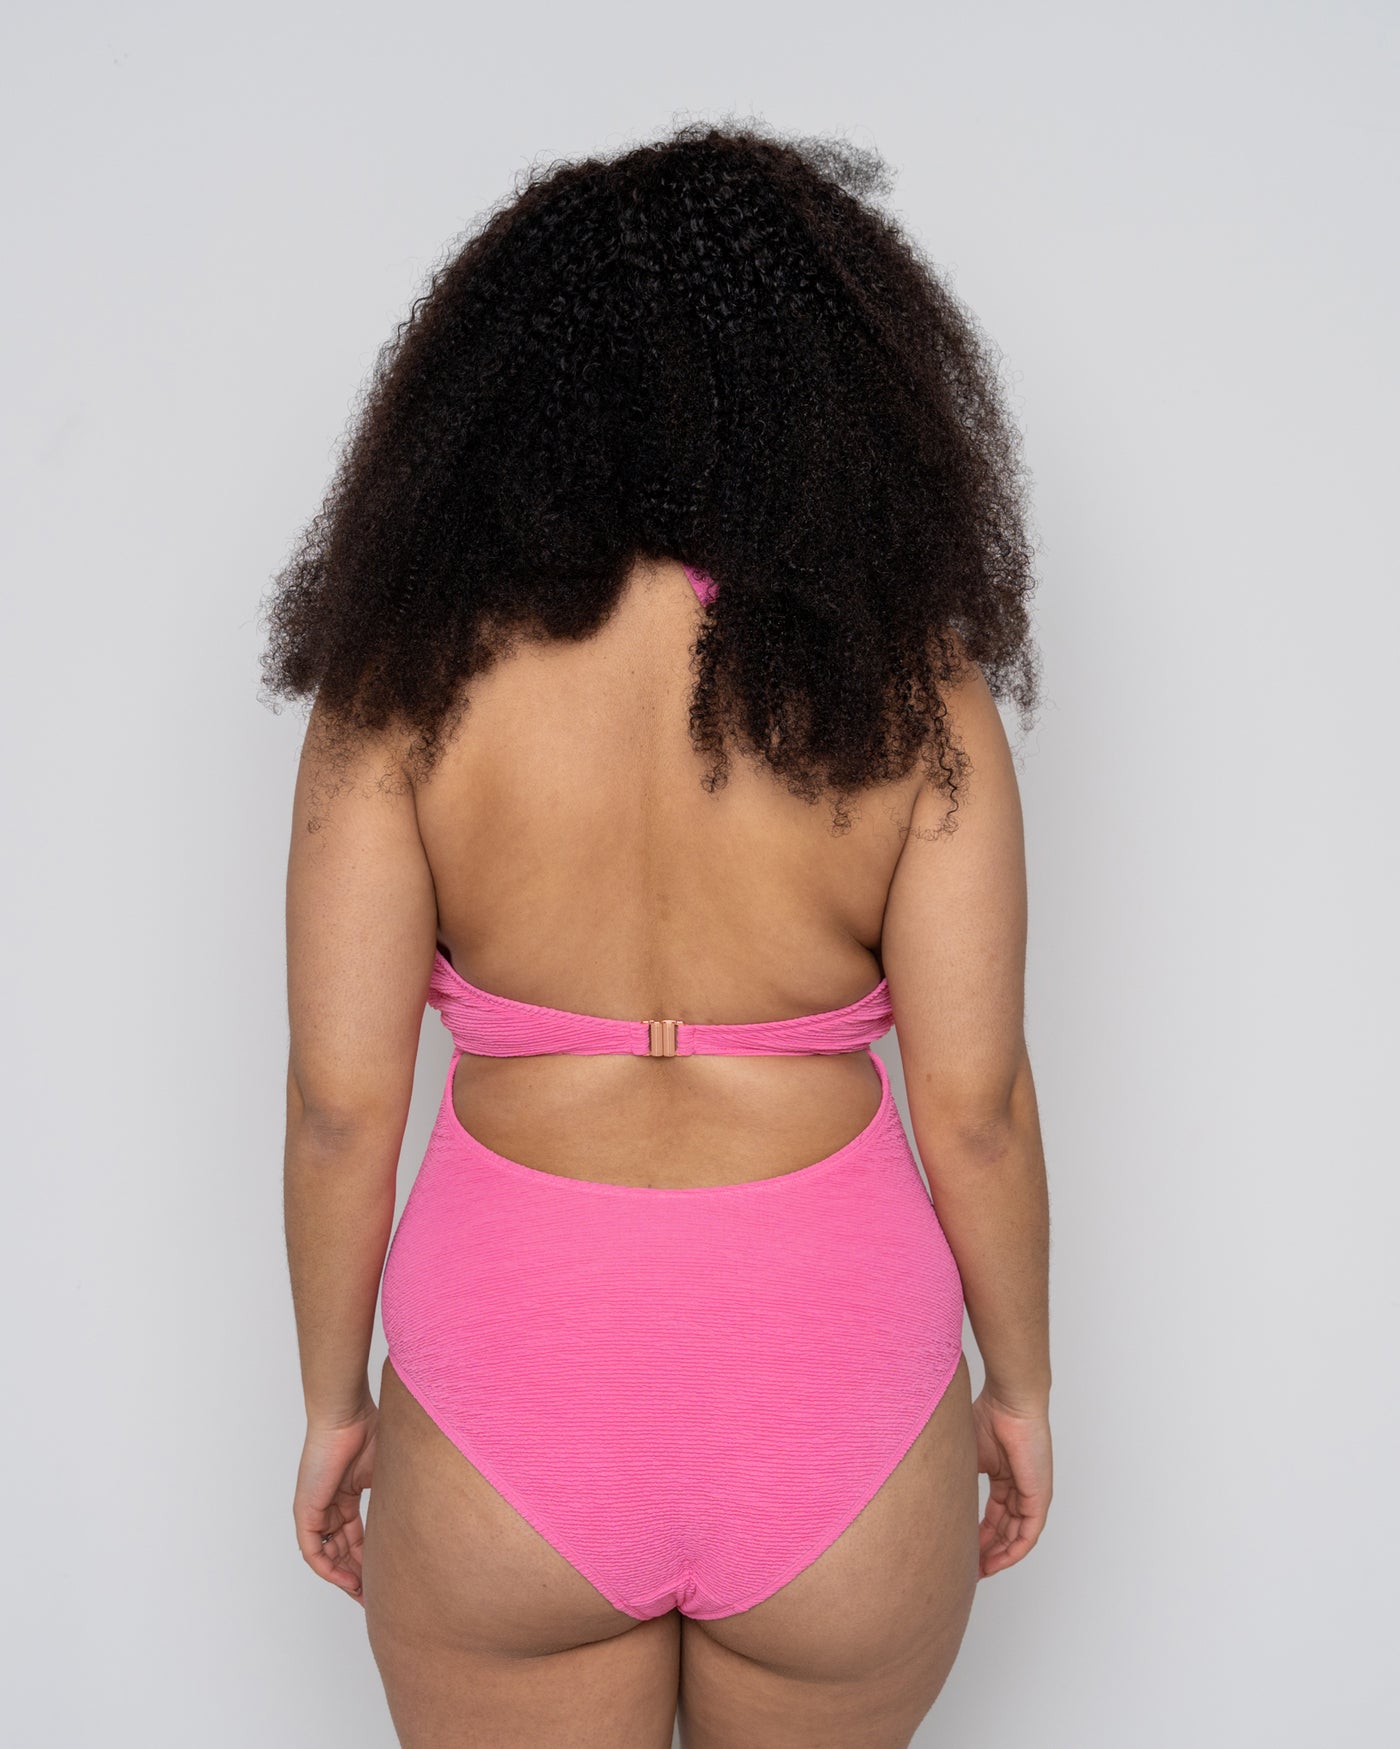 Ivory Rose Bright Pink Scrunch Halter Swimsuit - Chic Style 2